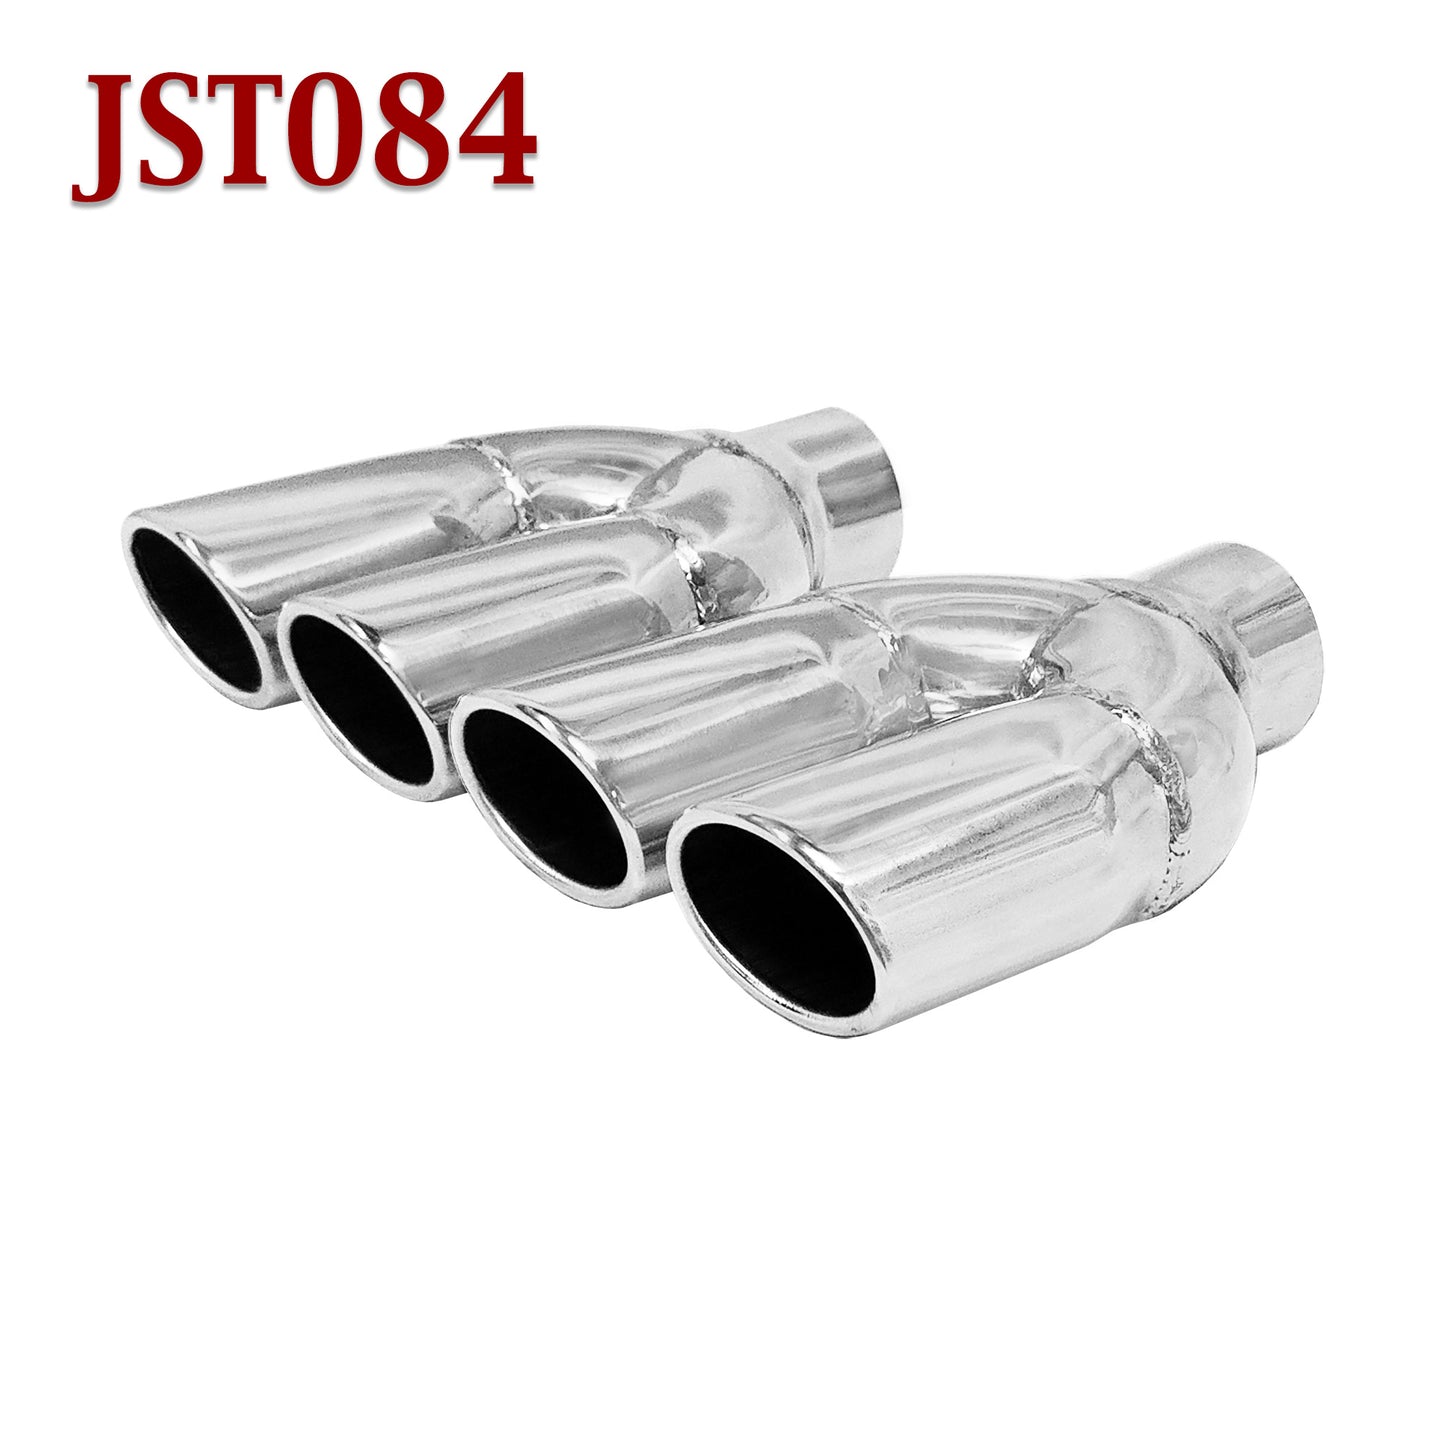 JST084 2.25" Stainless Dual Oval Exhaust Tip 2 1/4" Inlet / 6 3/8" x 2 3/8" Outlet / 7 3/8" Long